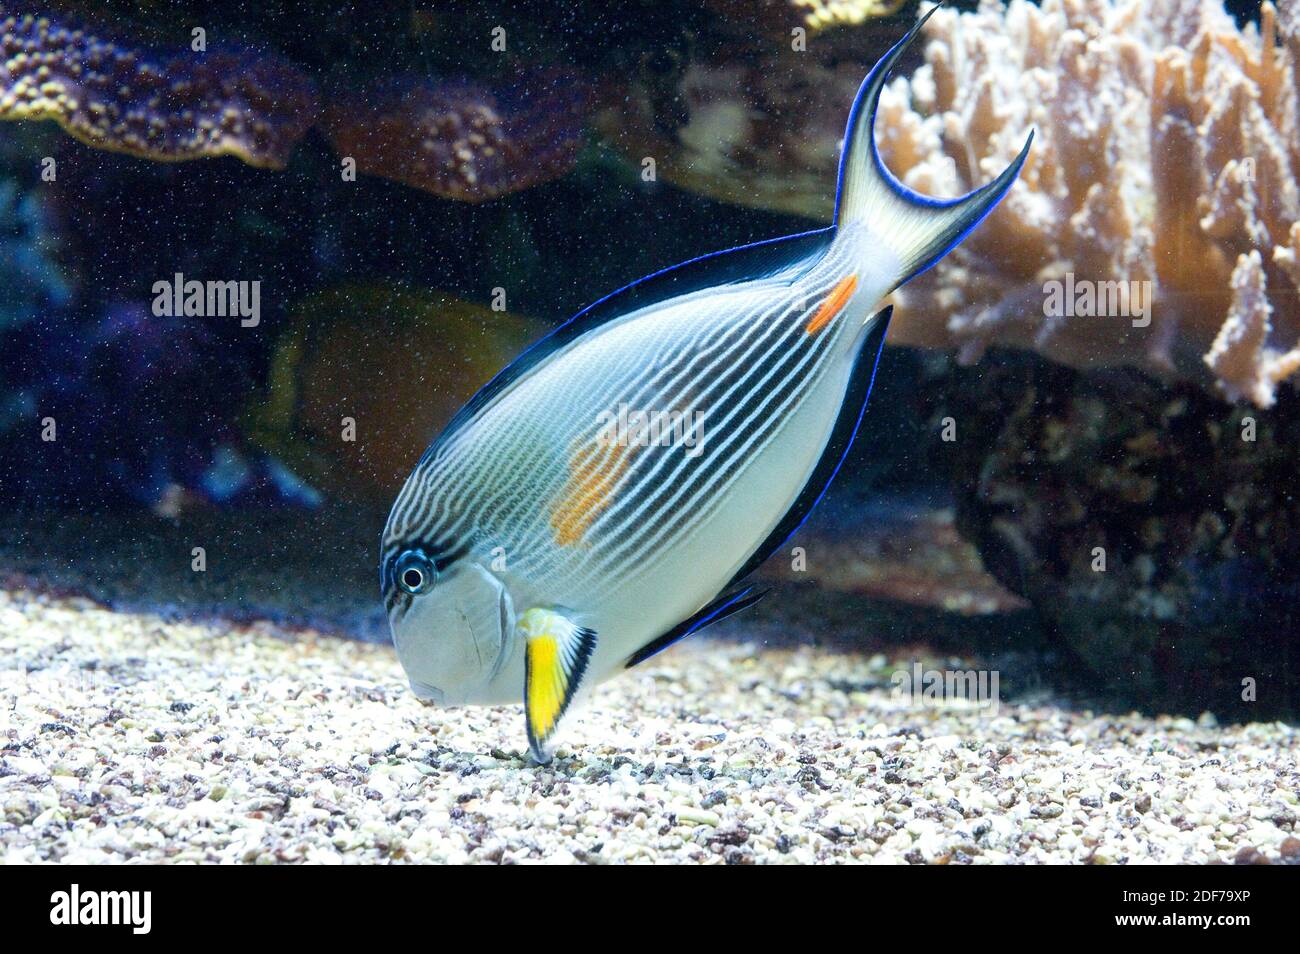 Sohal surgeonfish (Acanthurus sohal) is a tropical fish endemic to Red Sea. Stock Photo